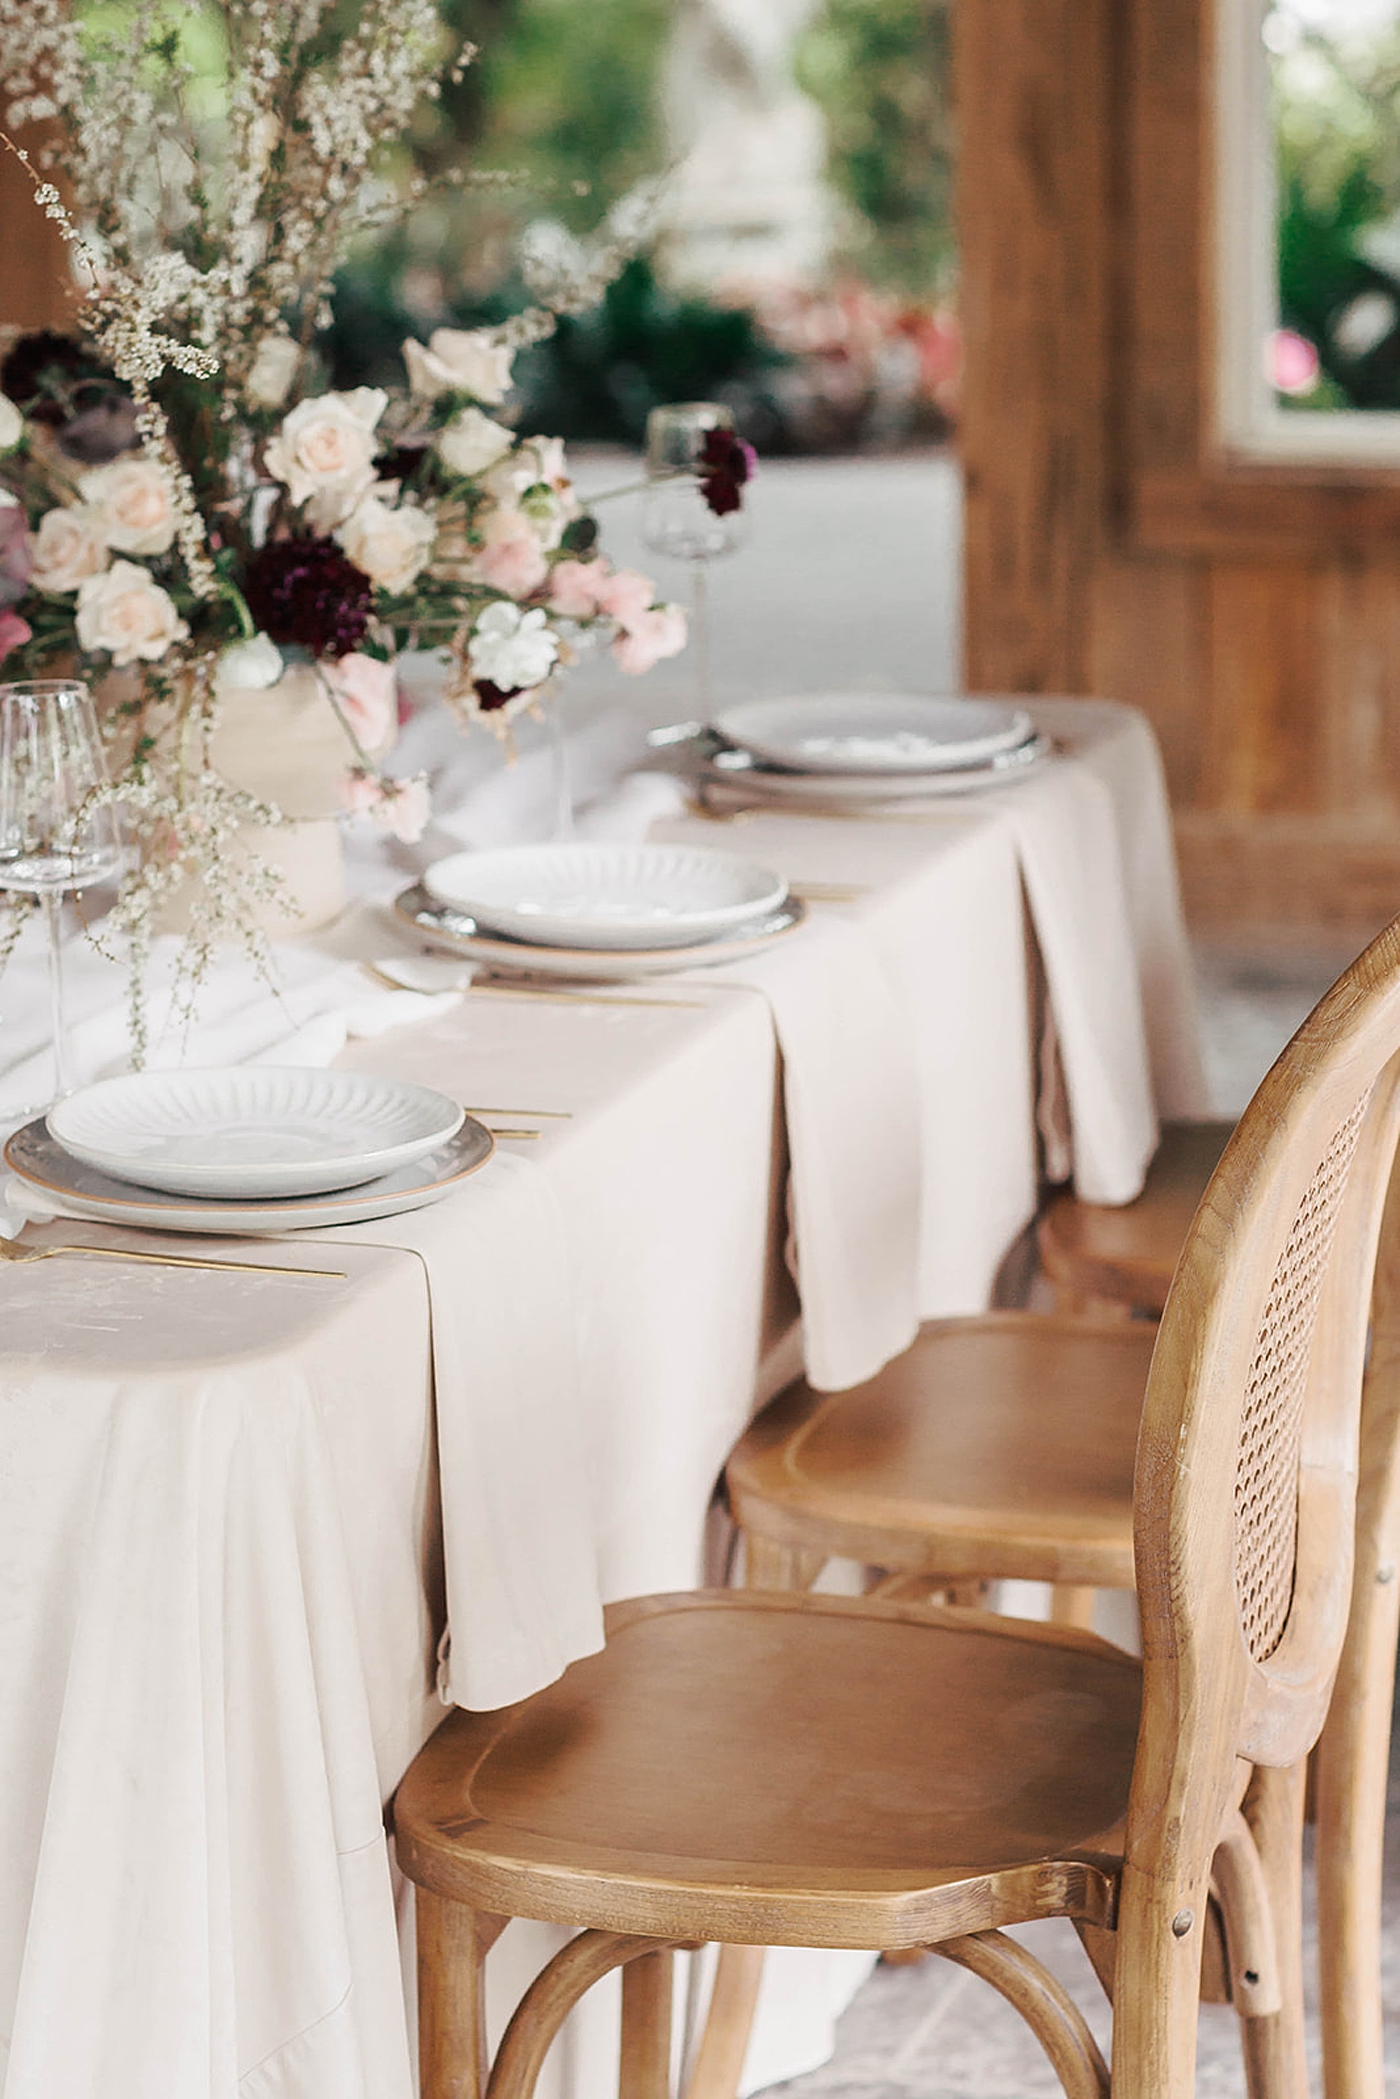 Wedding table with soft colored florals and linens | Romantic French Countryside Editorial by Carters Event Co